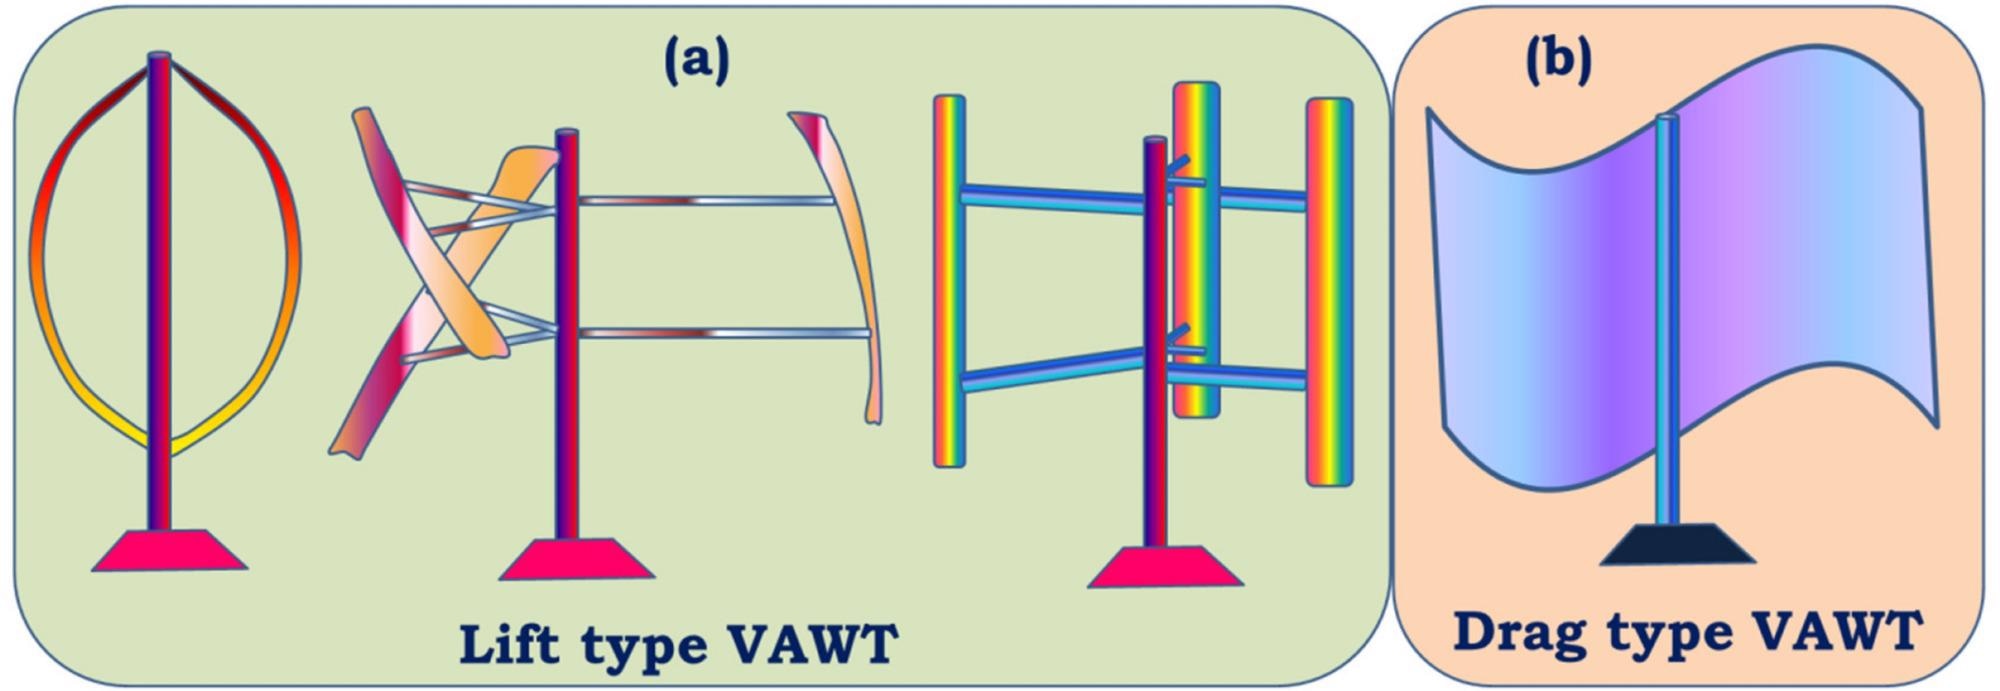 (a) Lift type vertical axis wind turbines (VAWTs) and (b) Drag type VAWT.